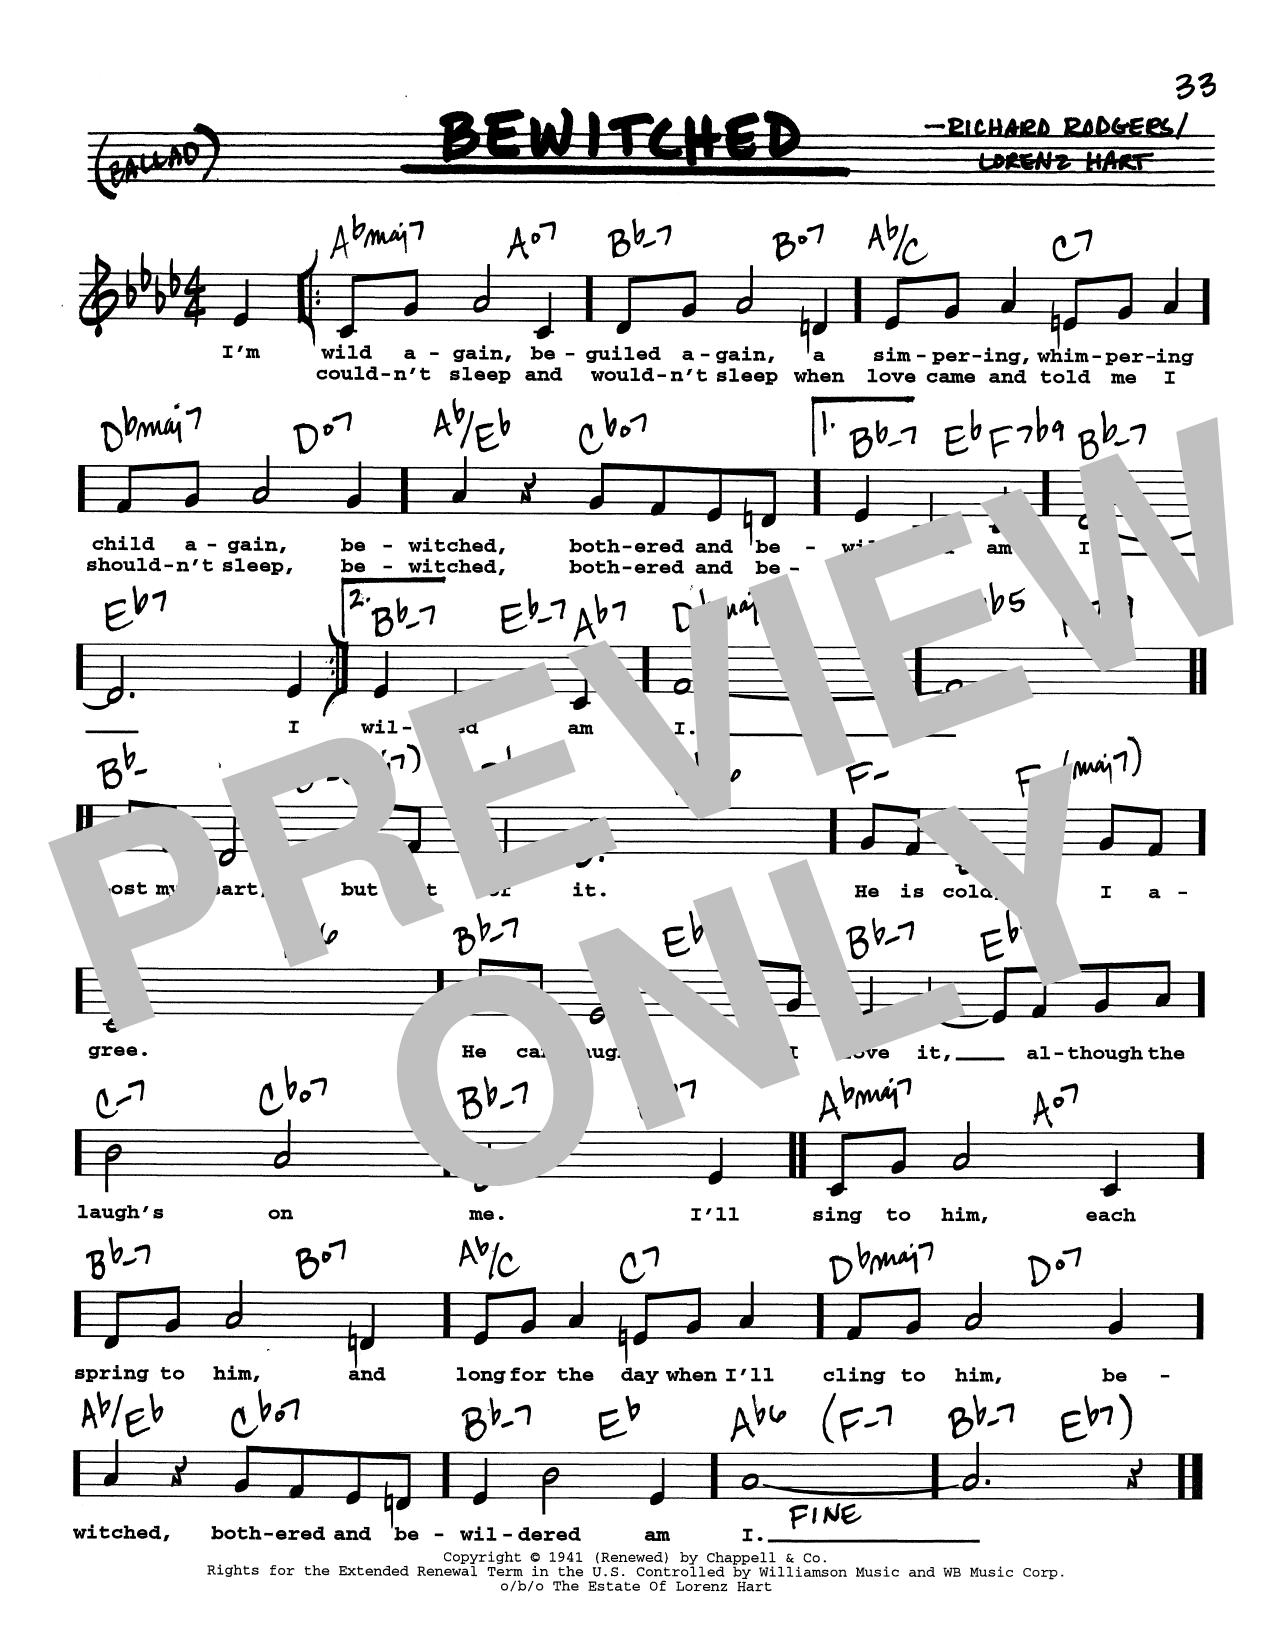 Rodgers & Hart Bewitched (Low Voice) sheet music notes printable PDF score